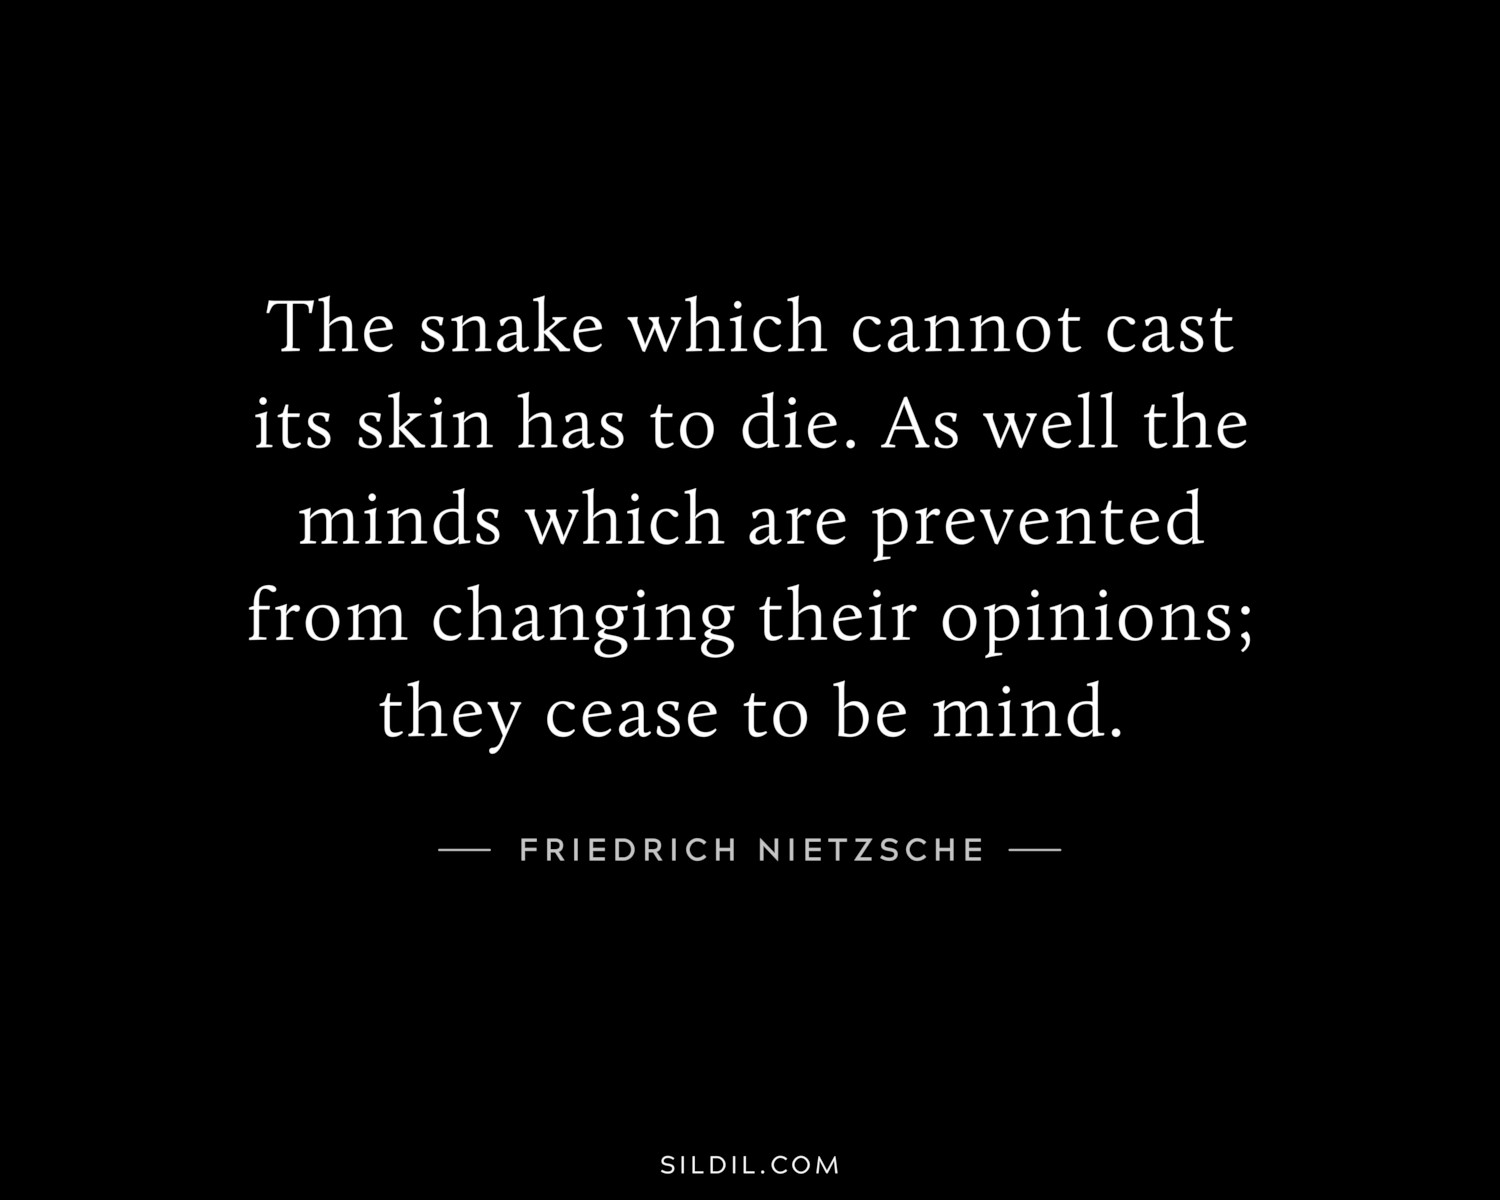 The snake which cannot cast its skin has to die. As well the minds which are prevented from changing their opinions; they cease to be mind.